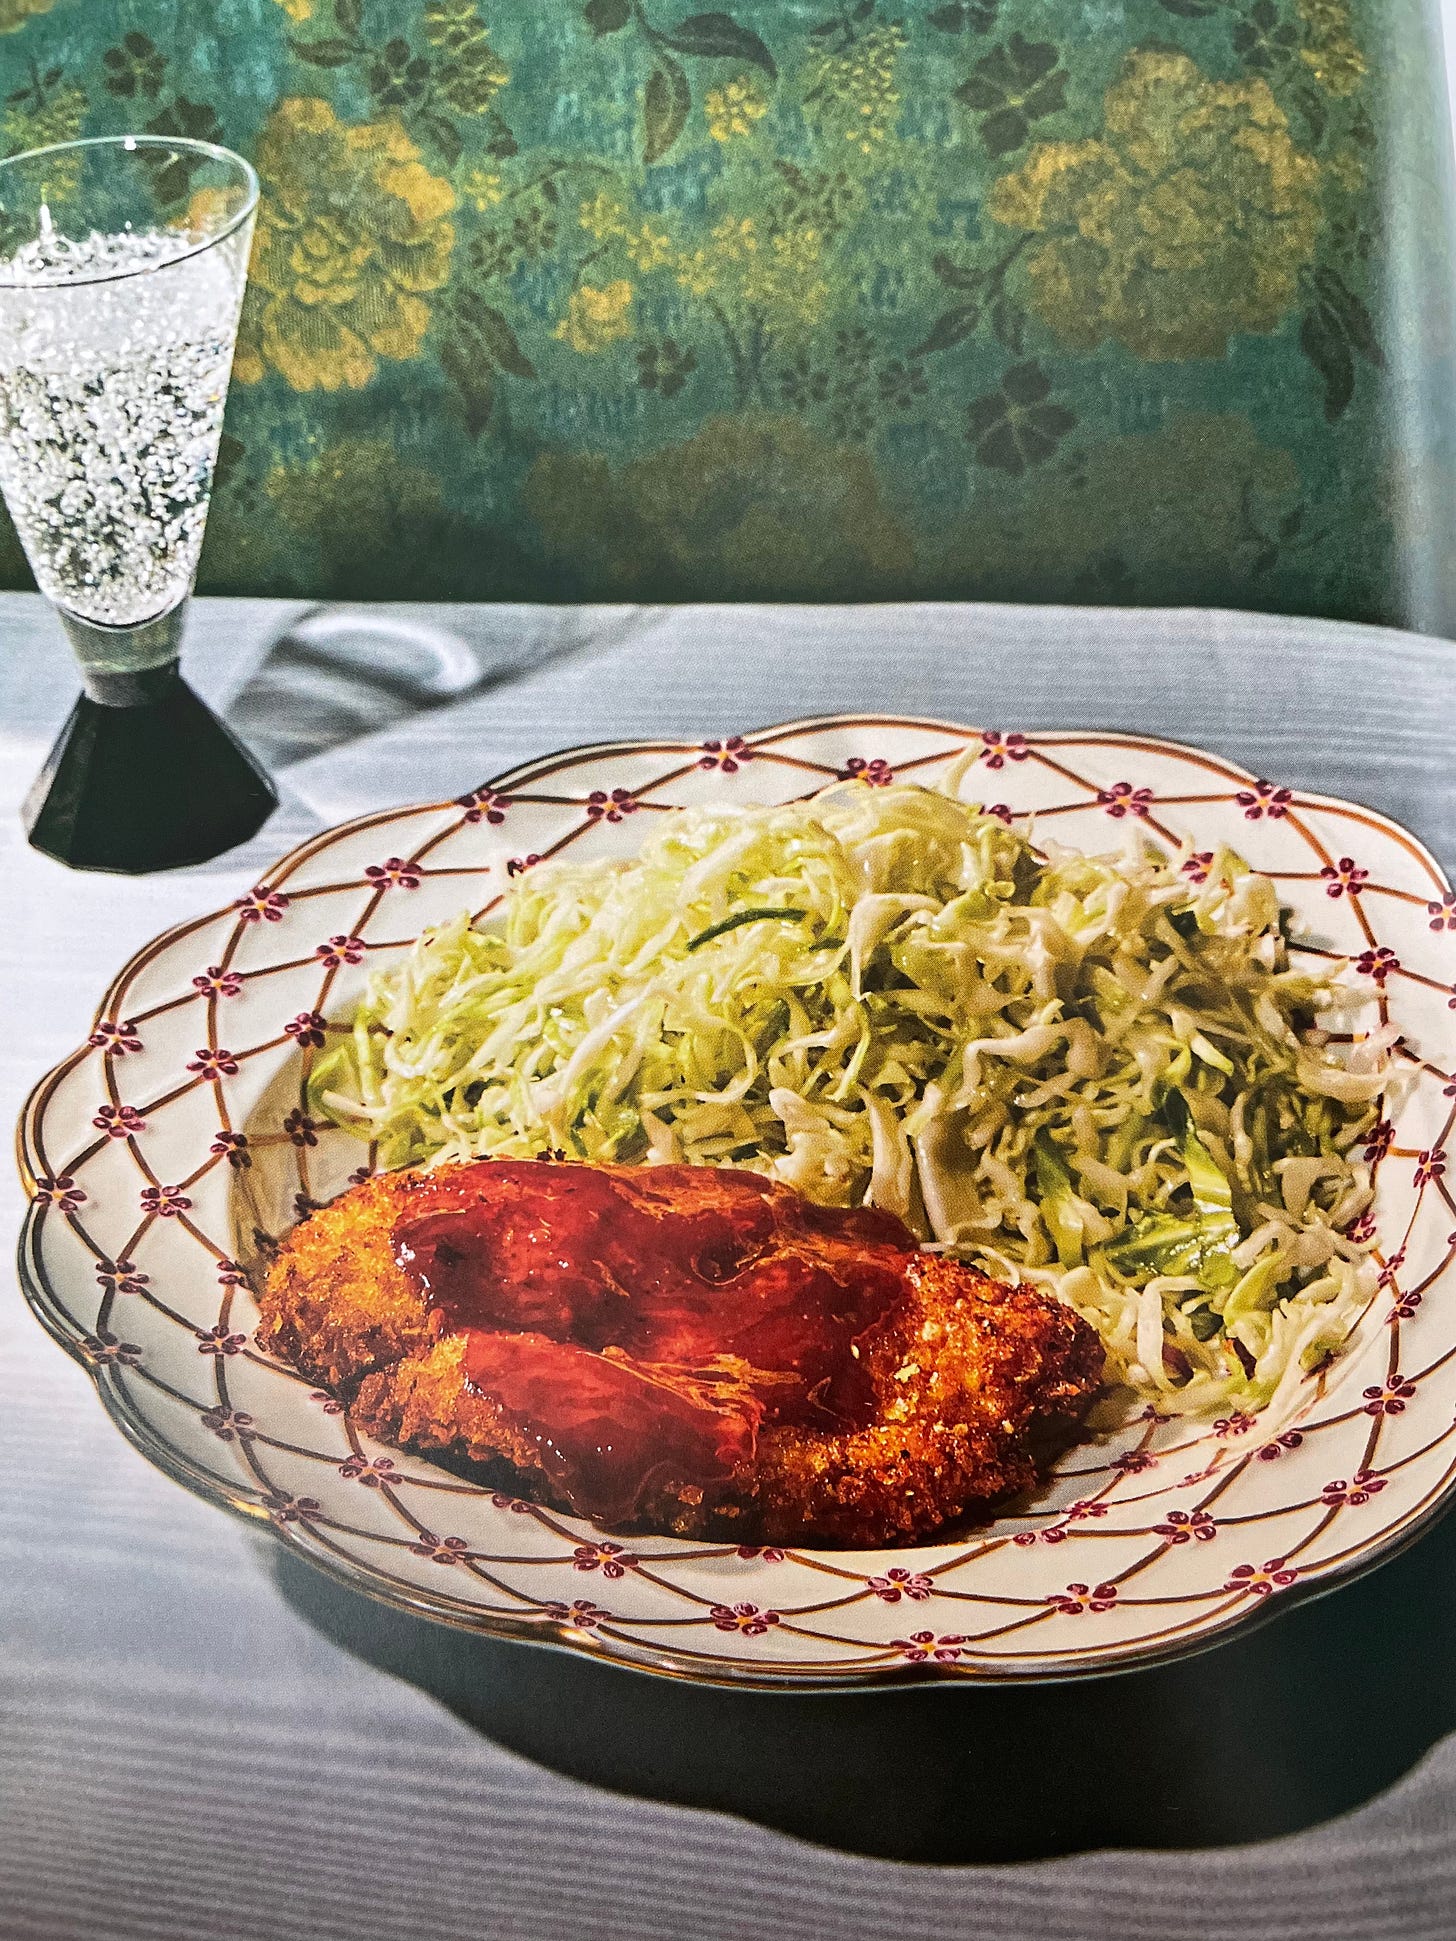 Crispy chicken cutlet with shredded cabbage